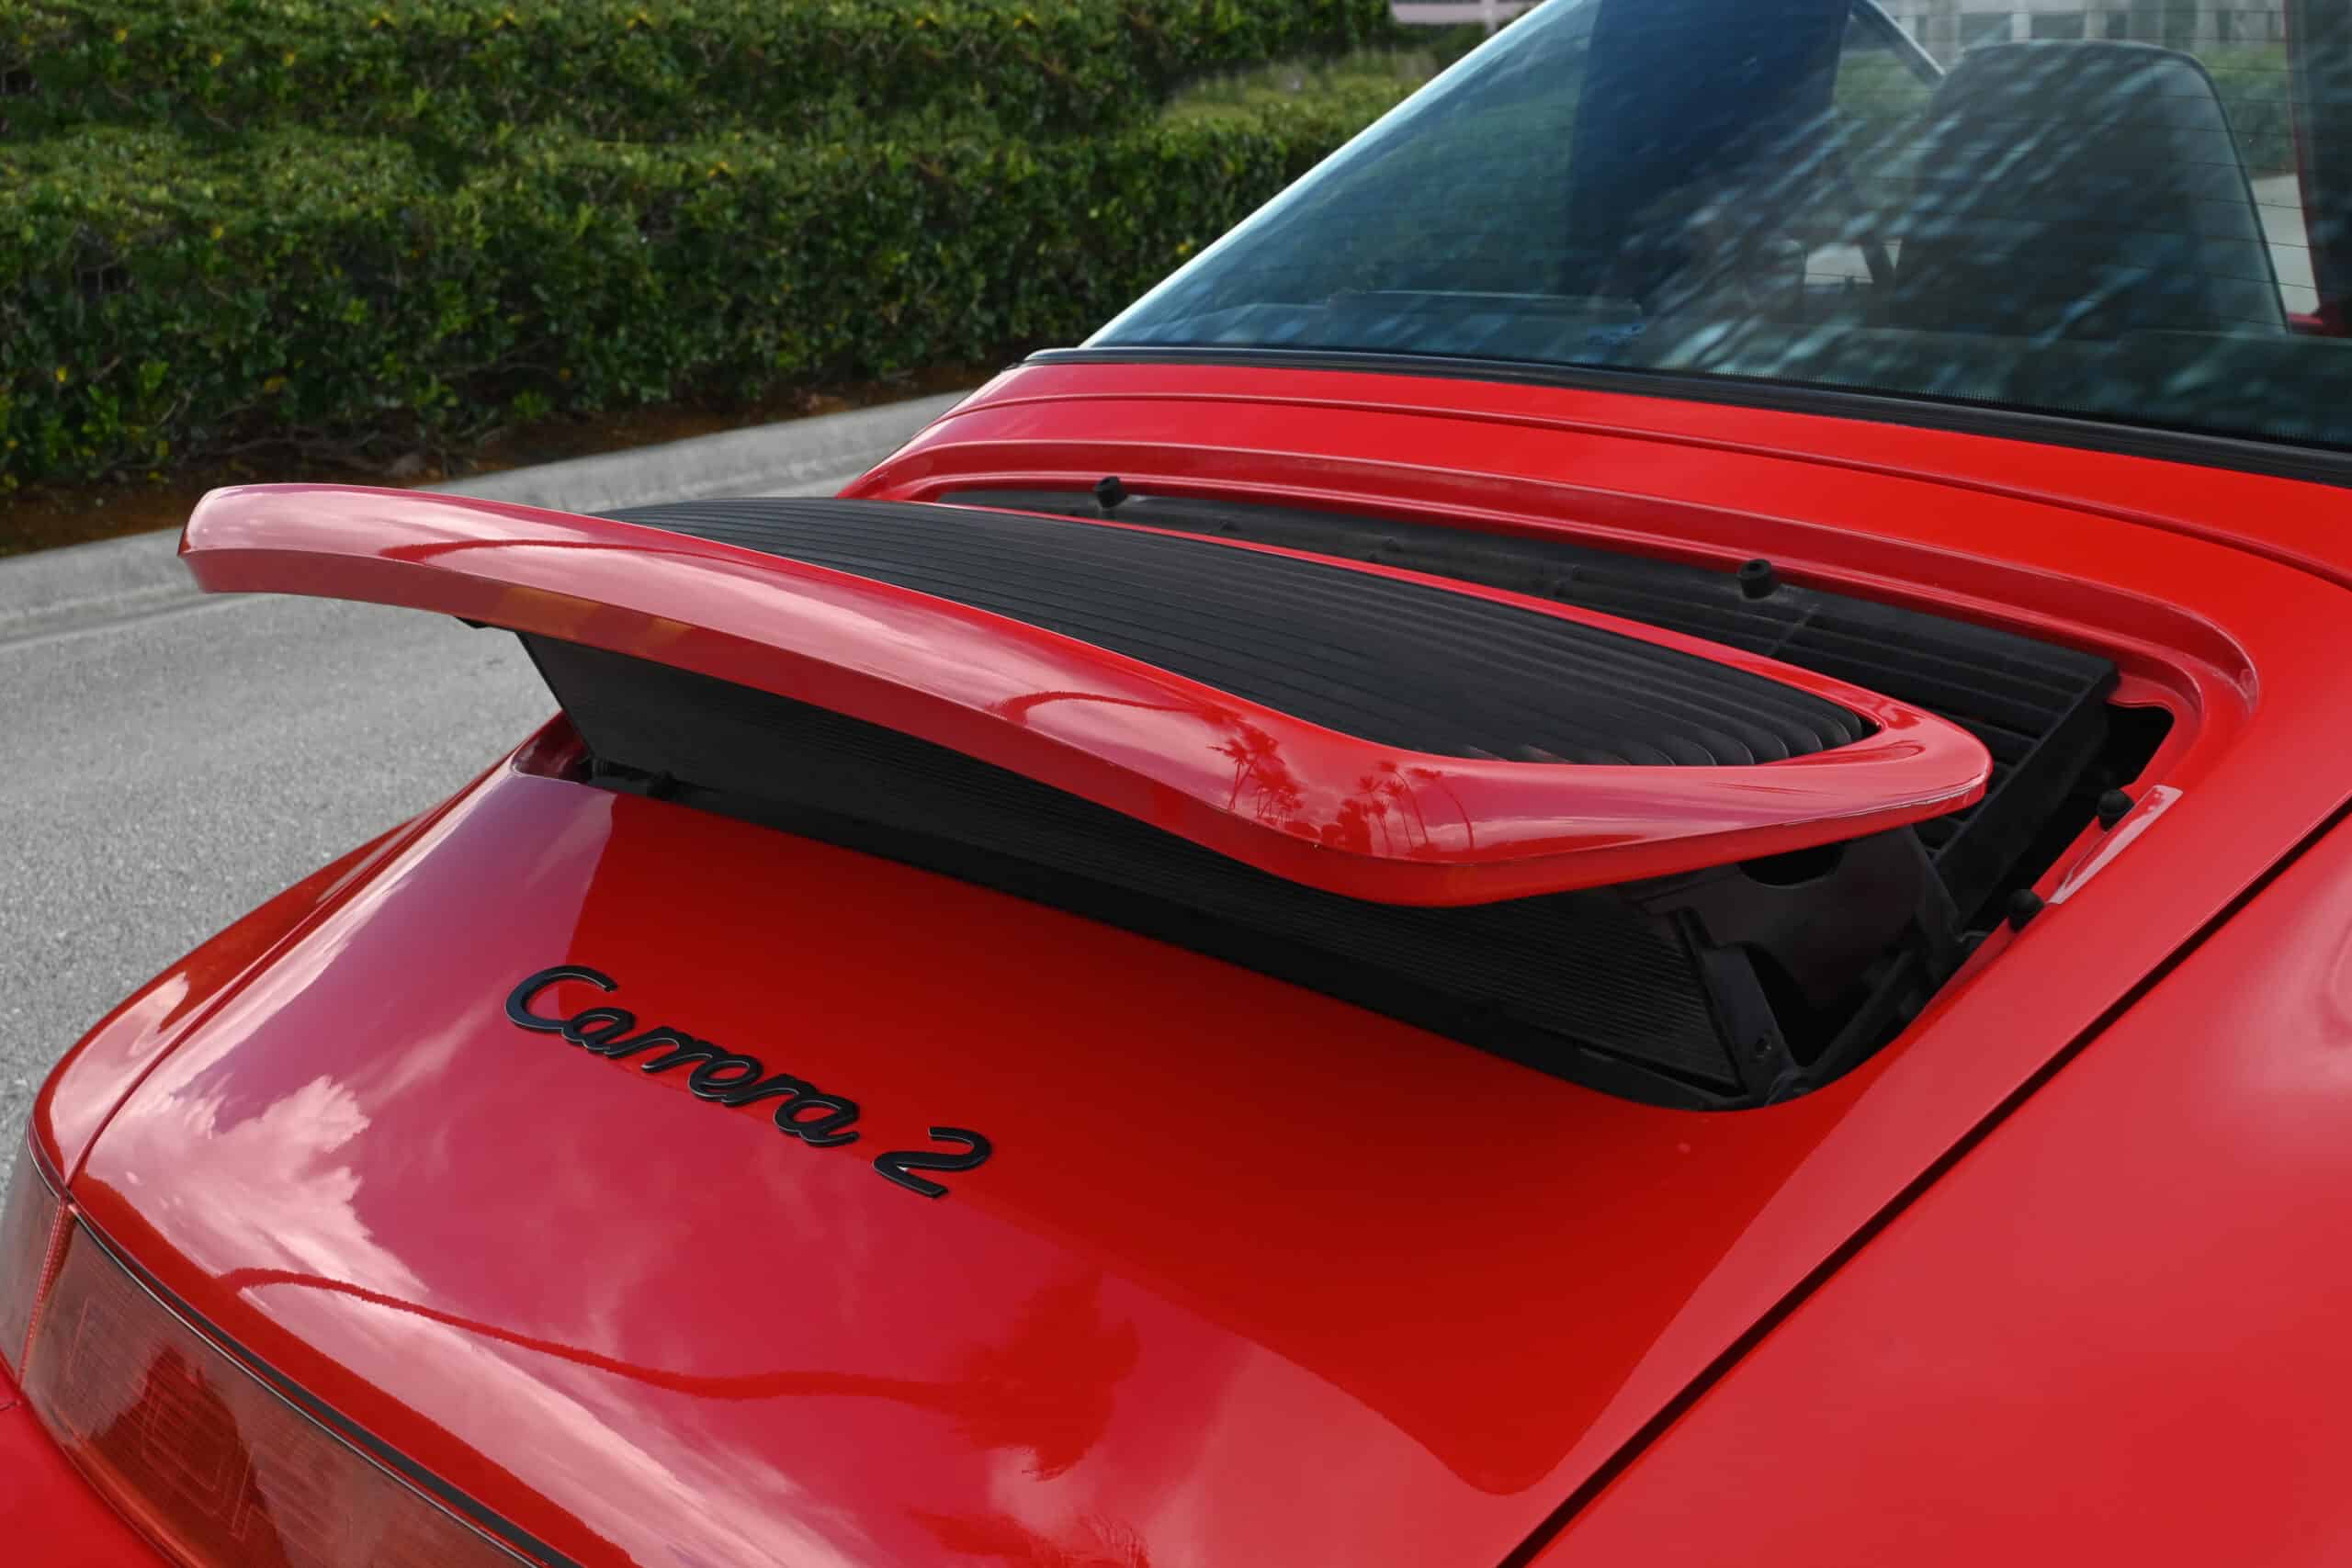 1992 964 Targa Carrera 2, only 37K actual miles, recently serviced in Germany, Original Condition, interior, and paint, Blaupunkt Bremen Bluetooth radio